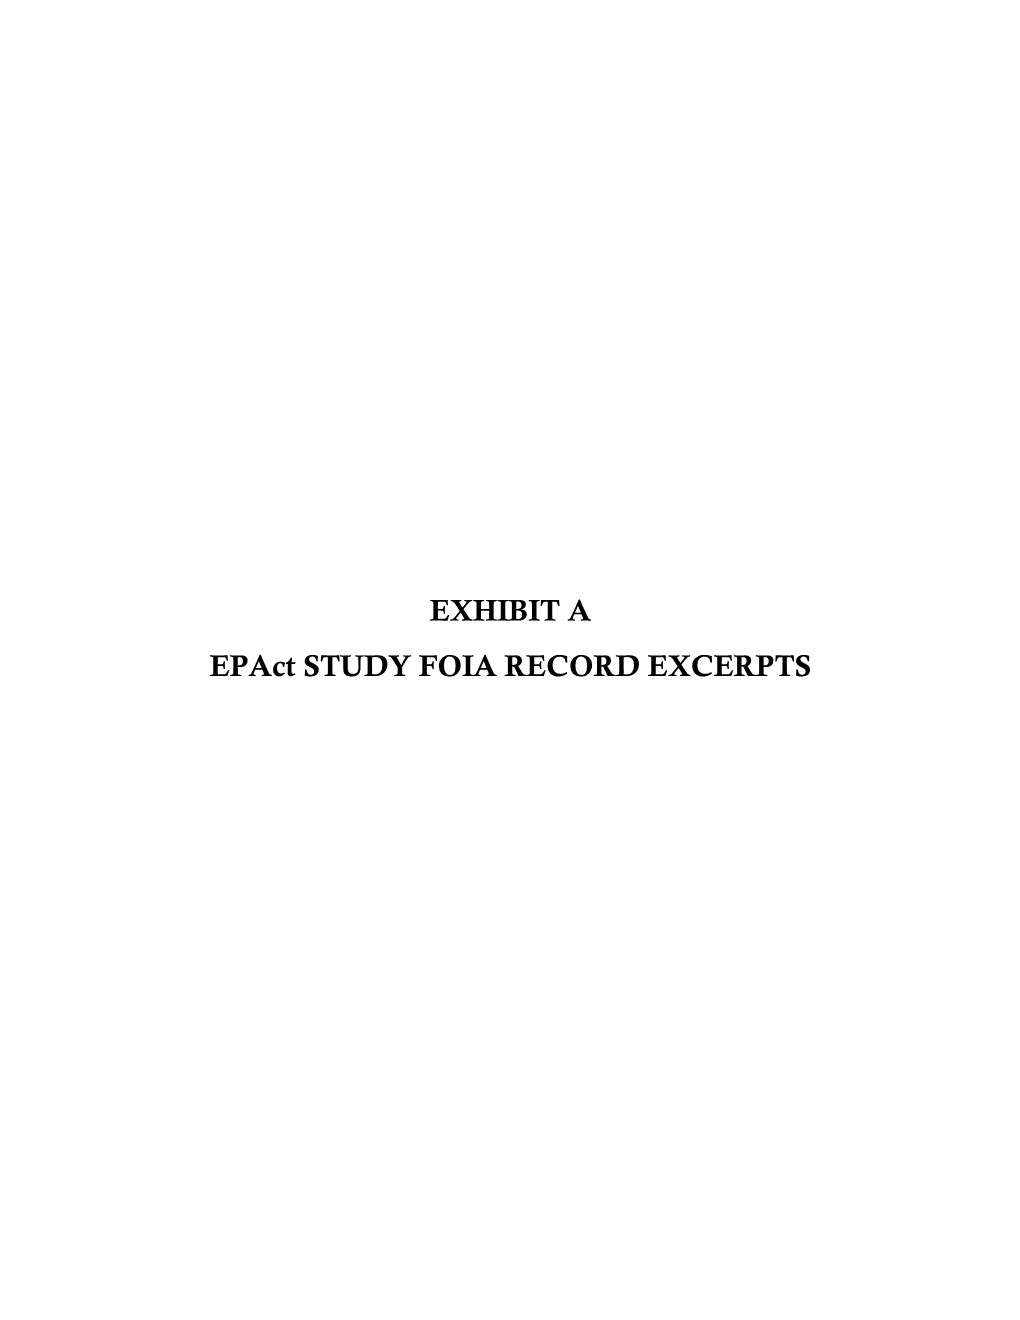 Exhibit a – Epact Study FOIA Record Excerpts